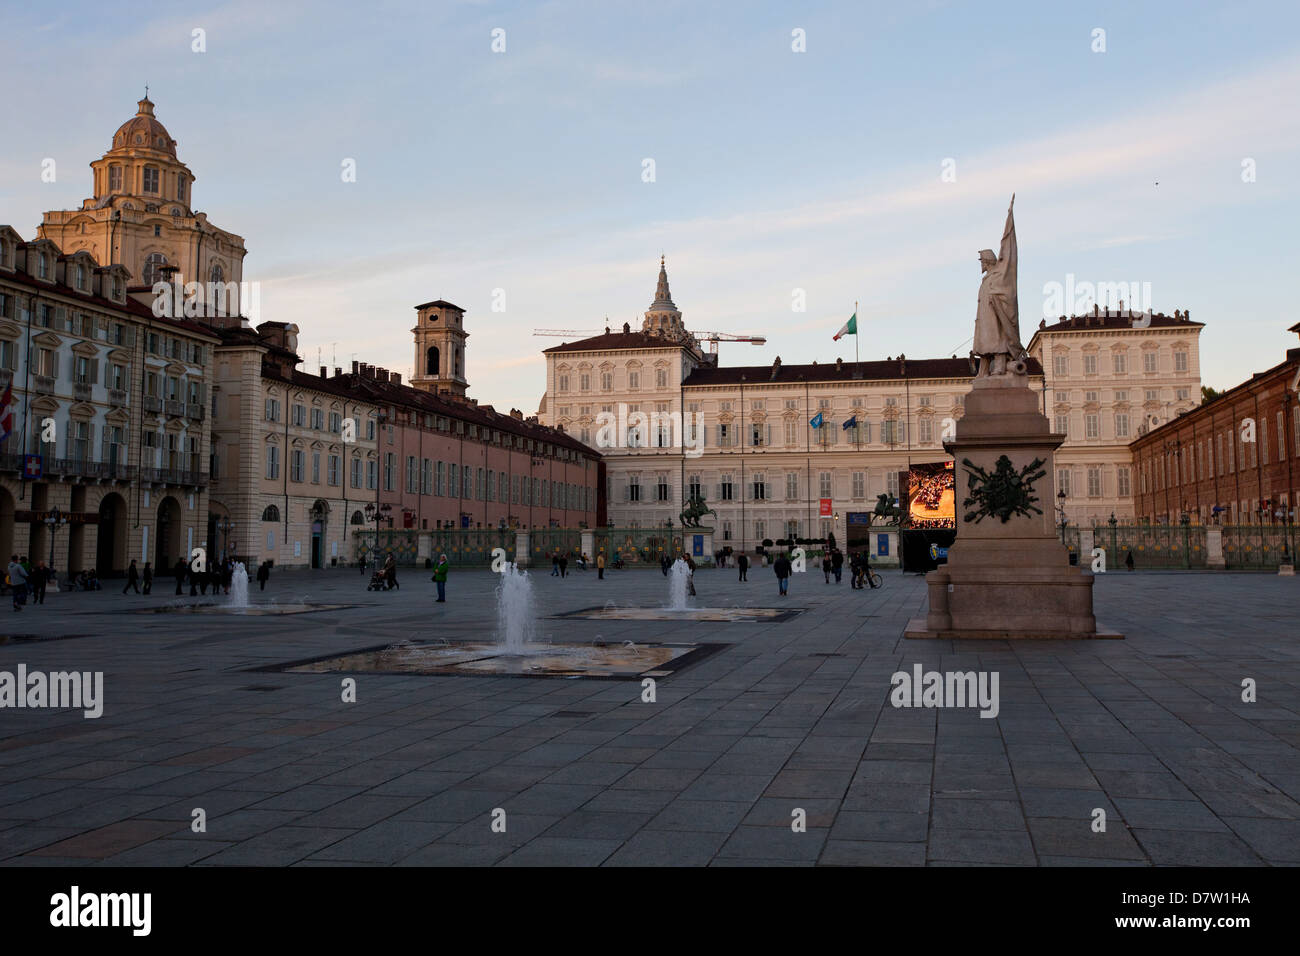 Piazza Castello, the main square in Turin, surrounded by Palazzo Madama and Palazzo Reale, Turin, Piedmont, Italy Stock Photo